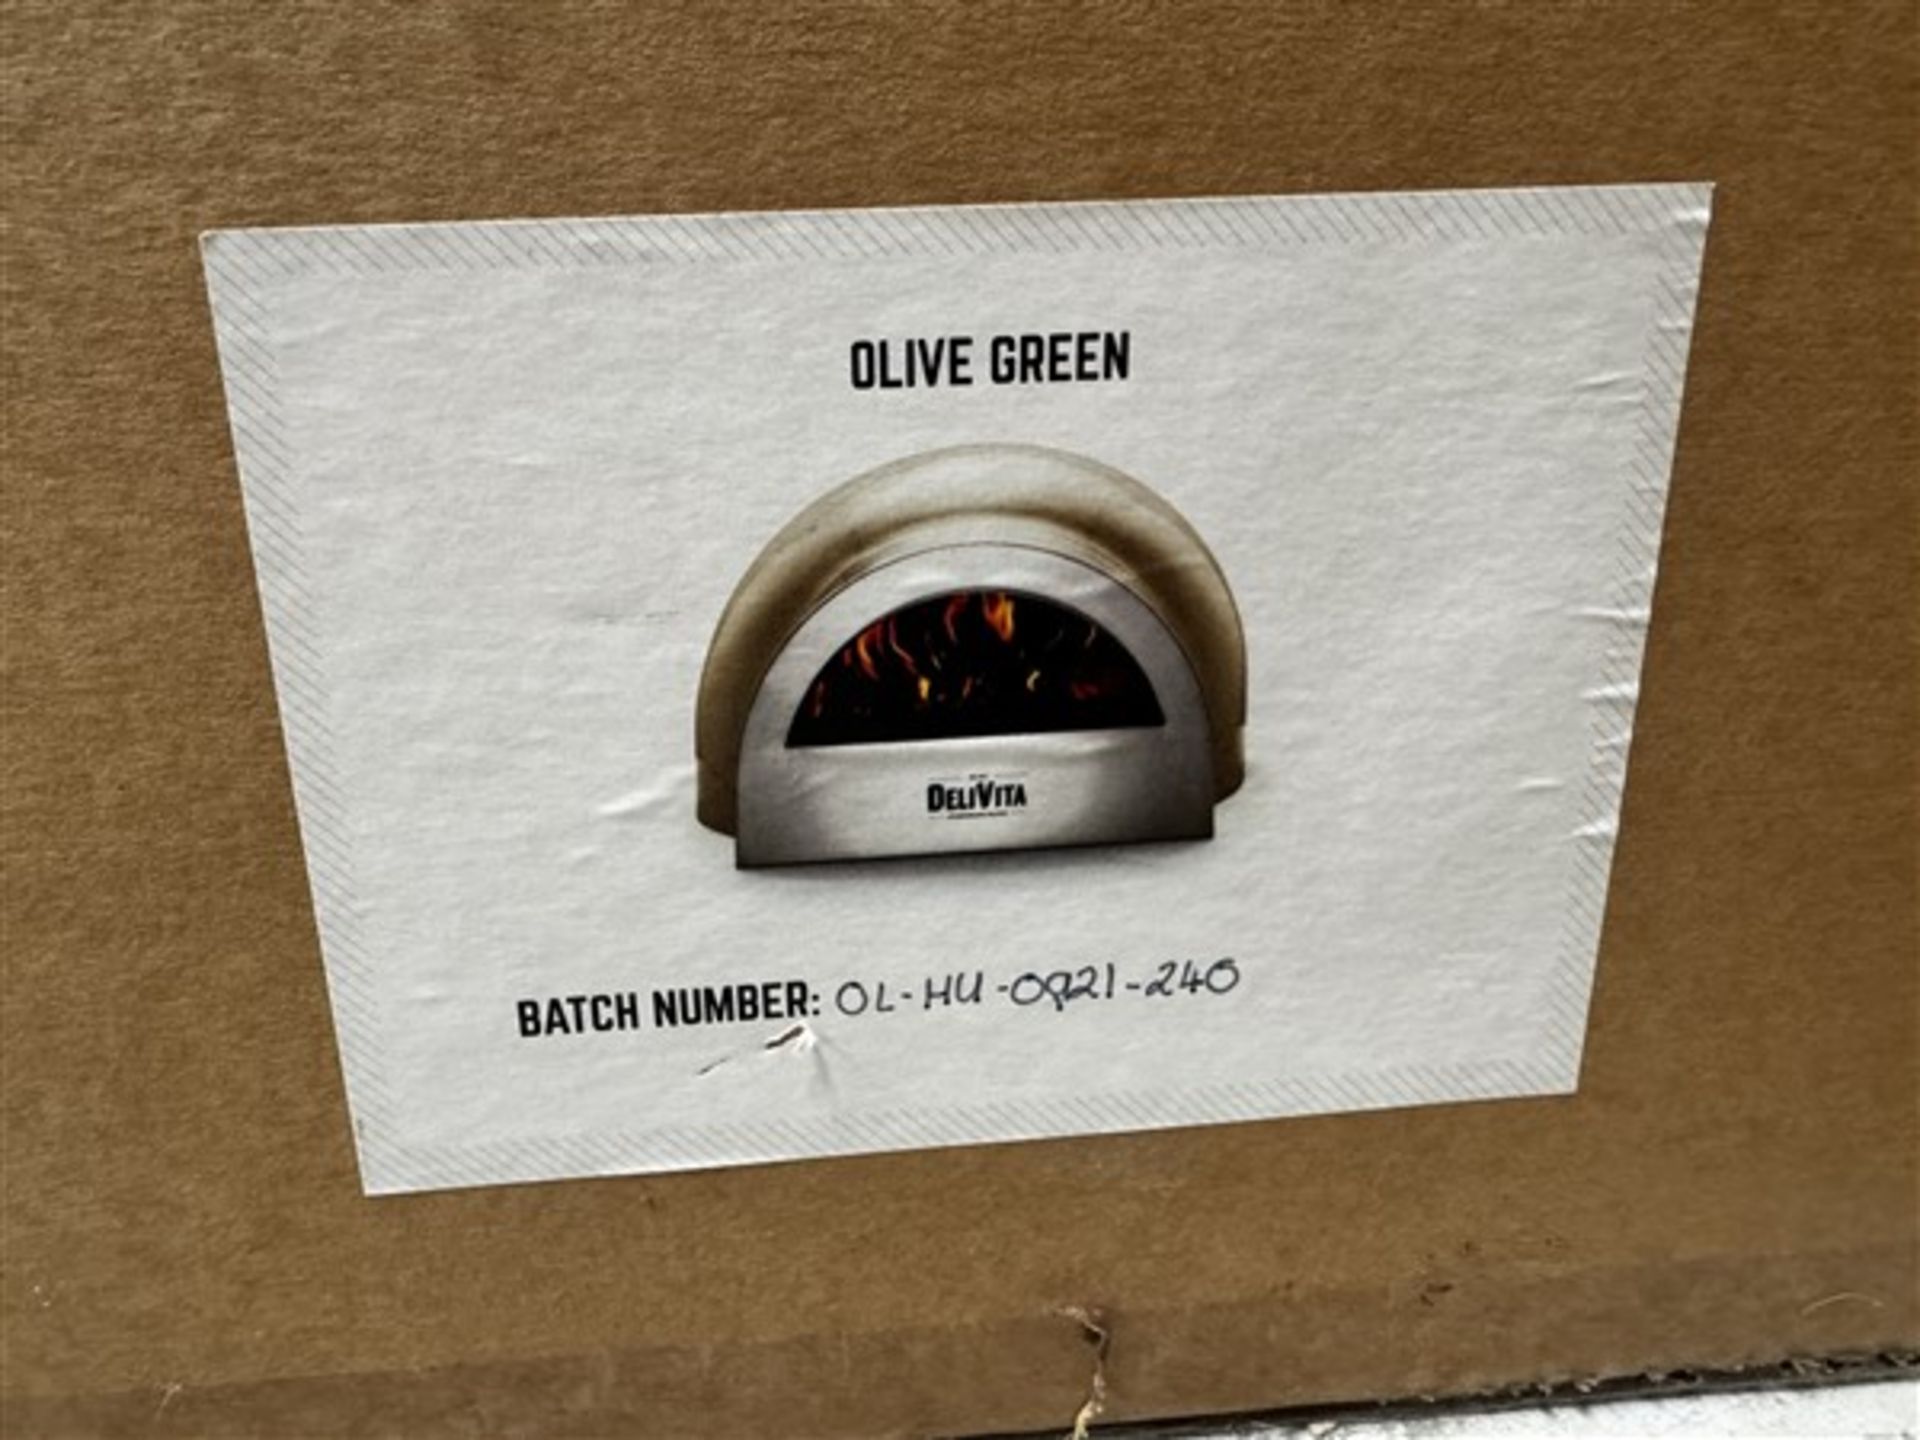 DeliVita olive green pizza oven Batch no: OL-HU-0921-240T (Located at South Brent: Viewing and - Image 2 of 3